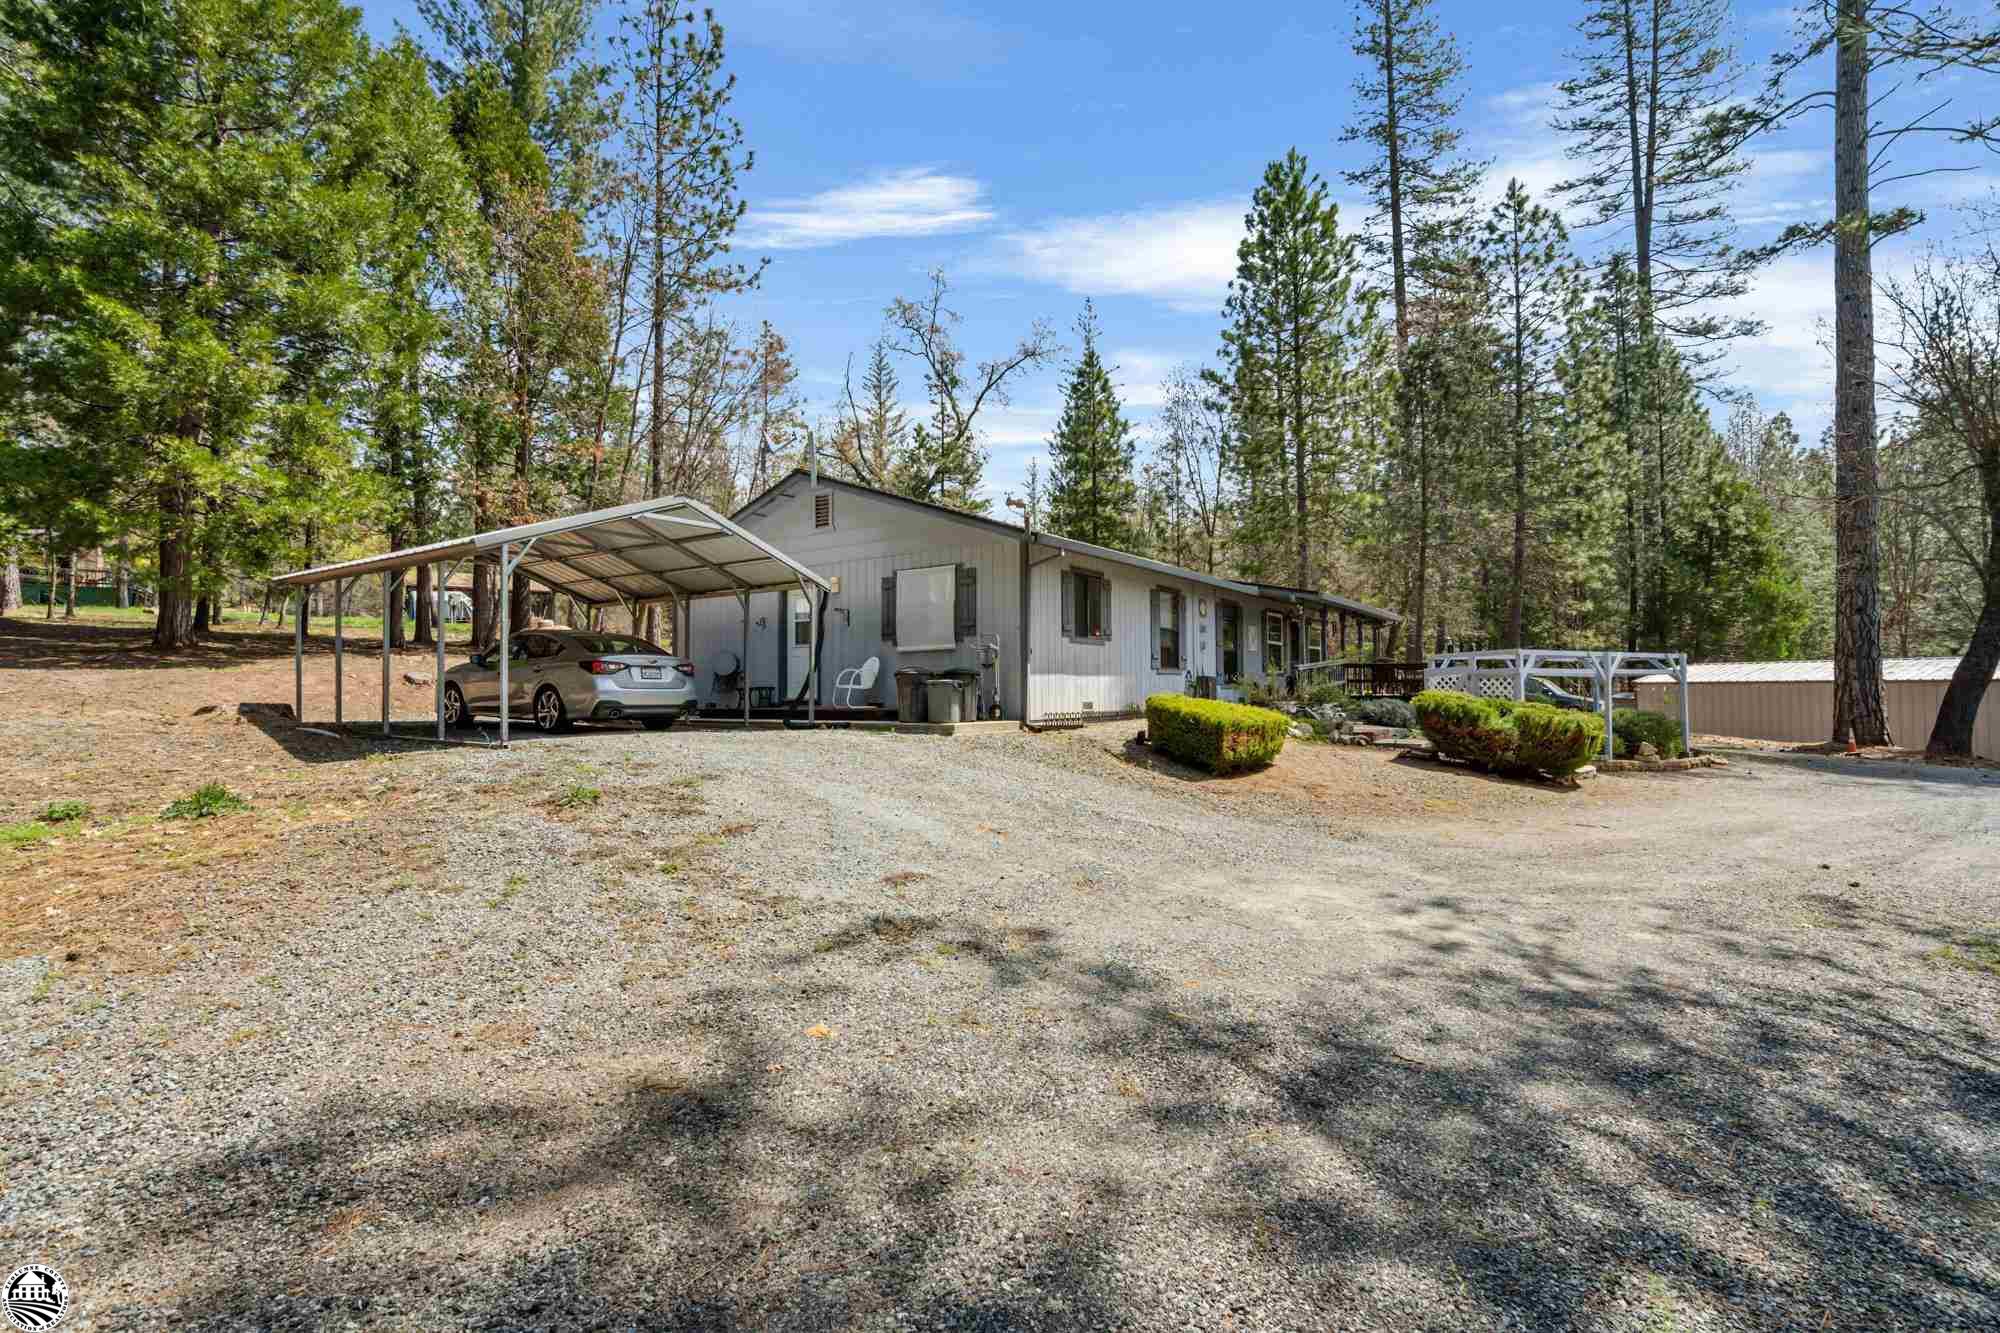 Photo of 10370 Fiske Rd in Coulterville, CA